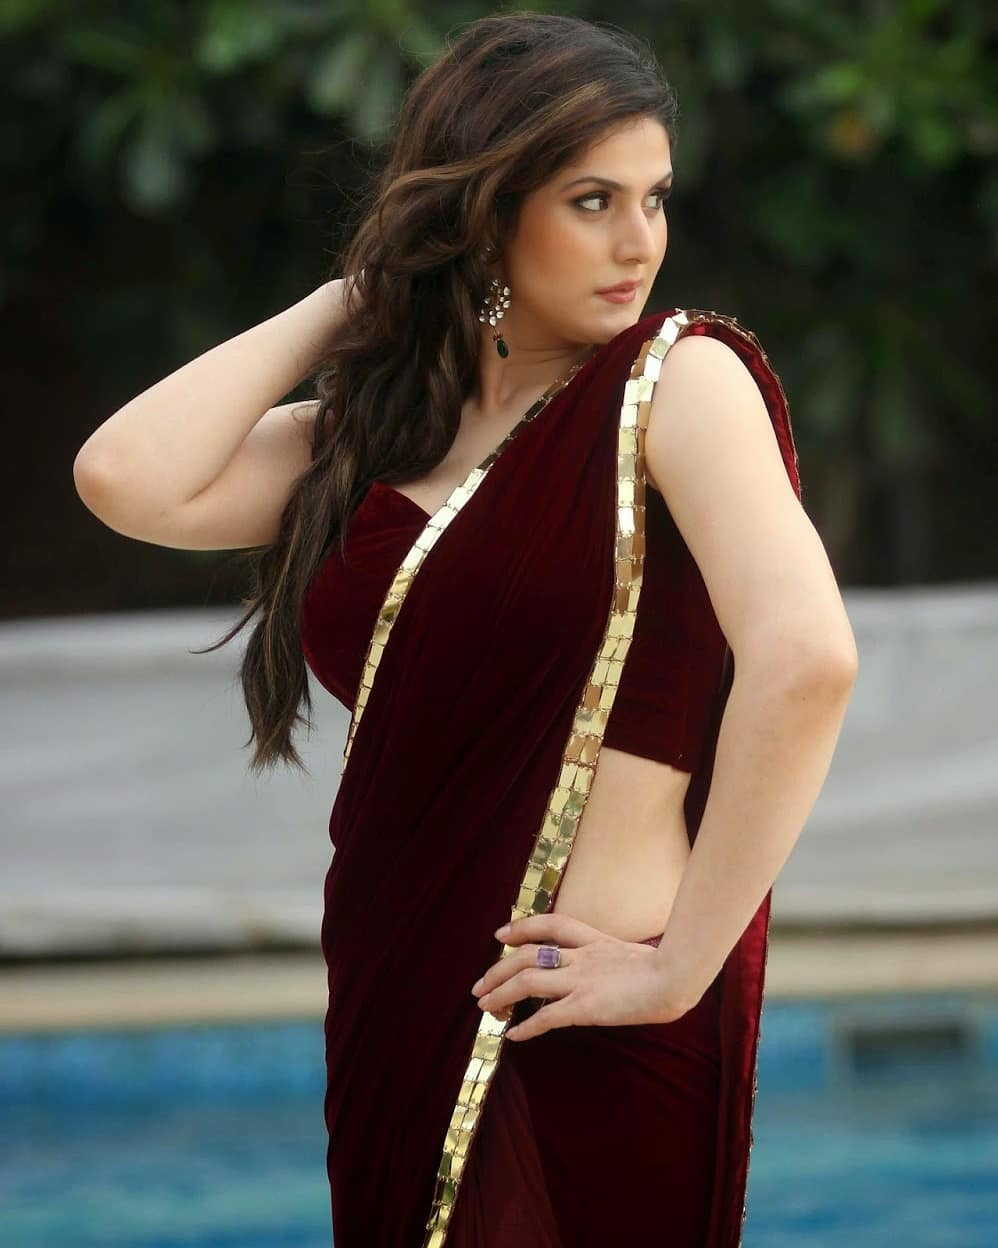 Zarine Khan Show Casing Her Most Amazing Curves In Maroon Revealing Saree